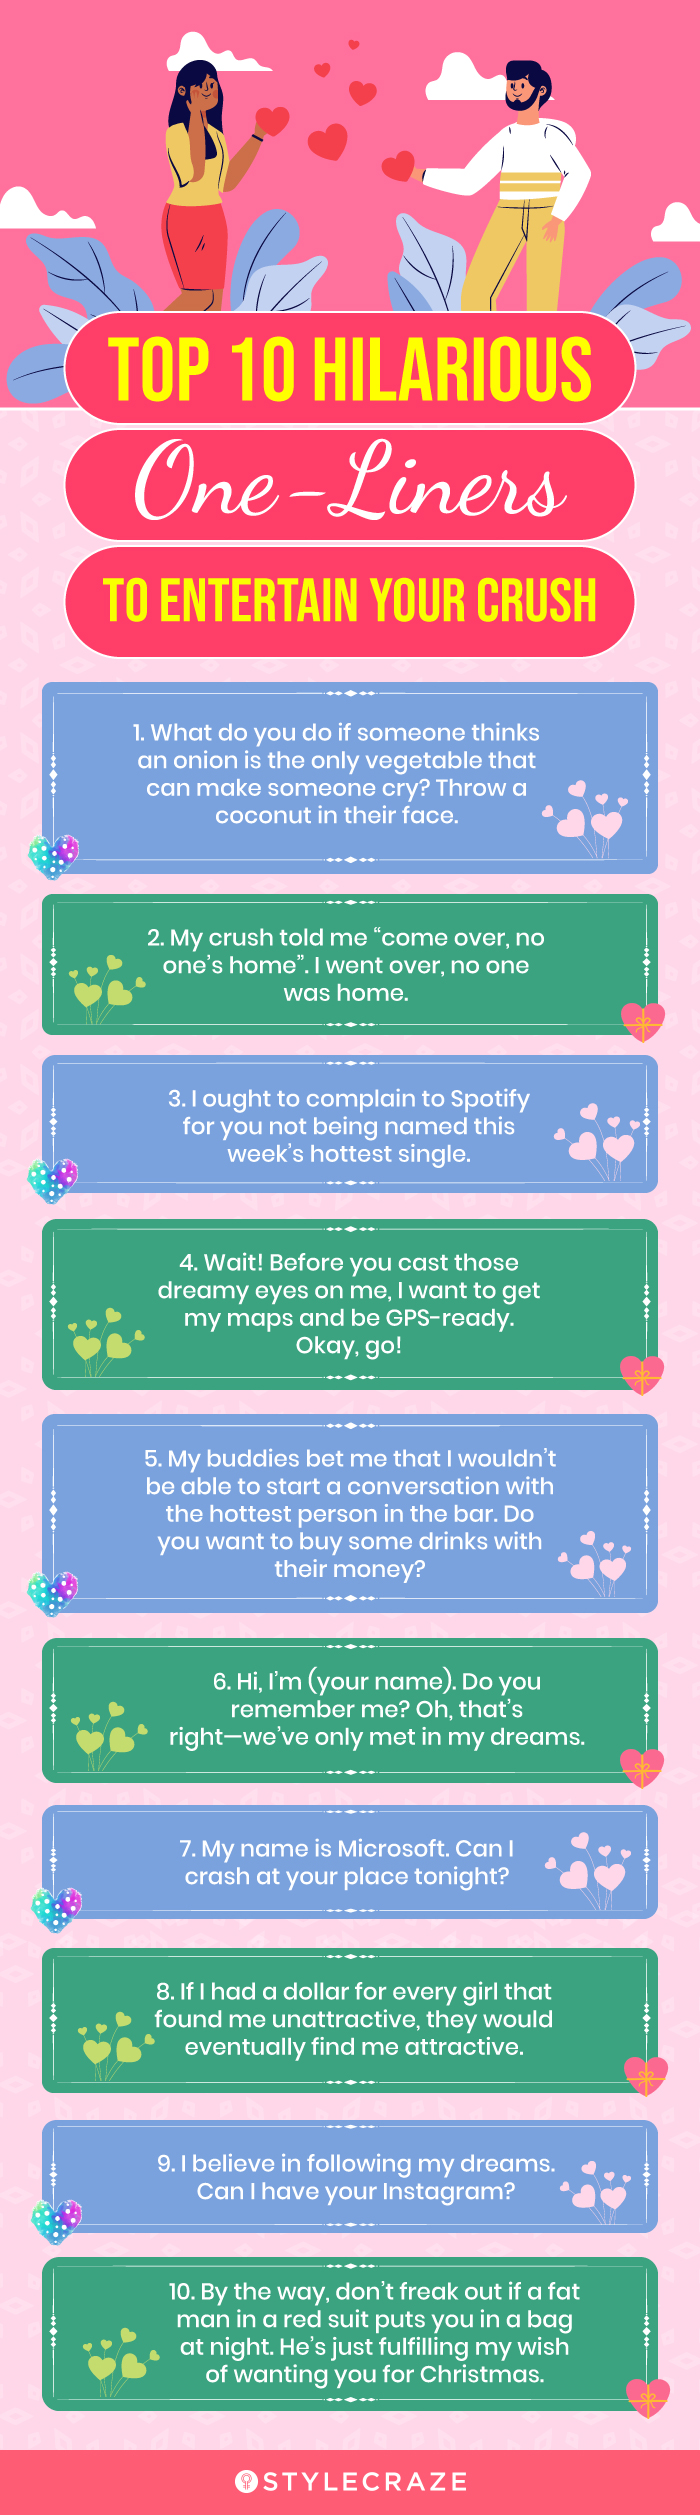 top 10 hilarious one liners to entertain your crush (infographic)